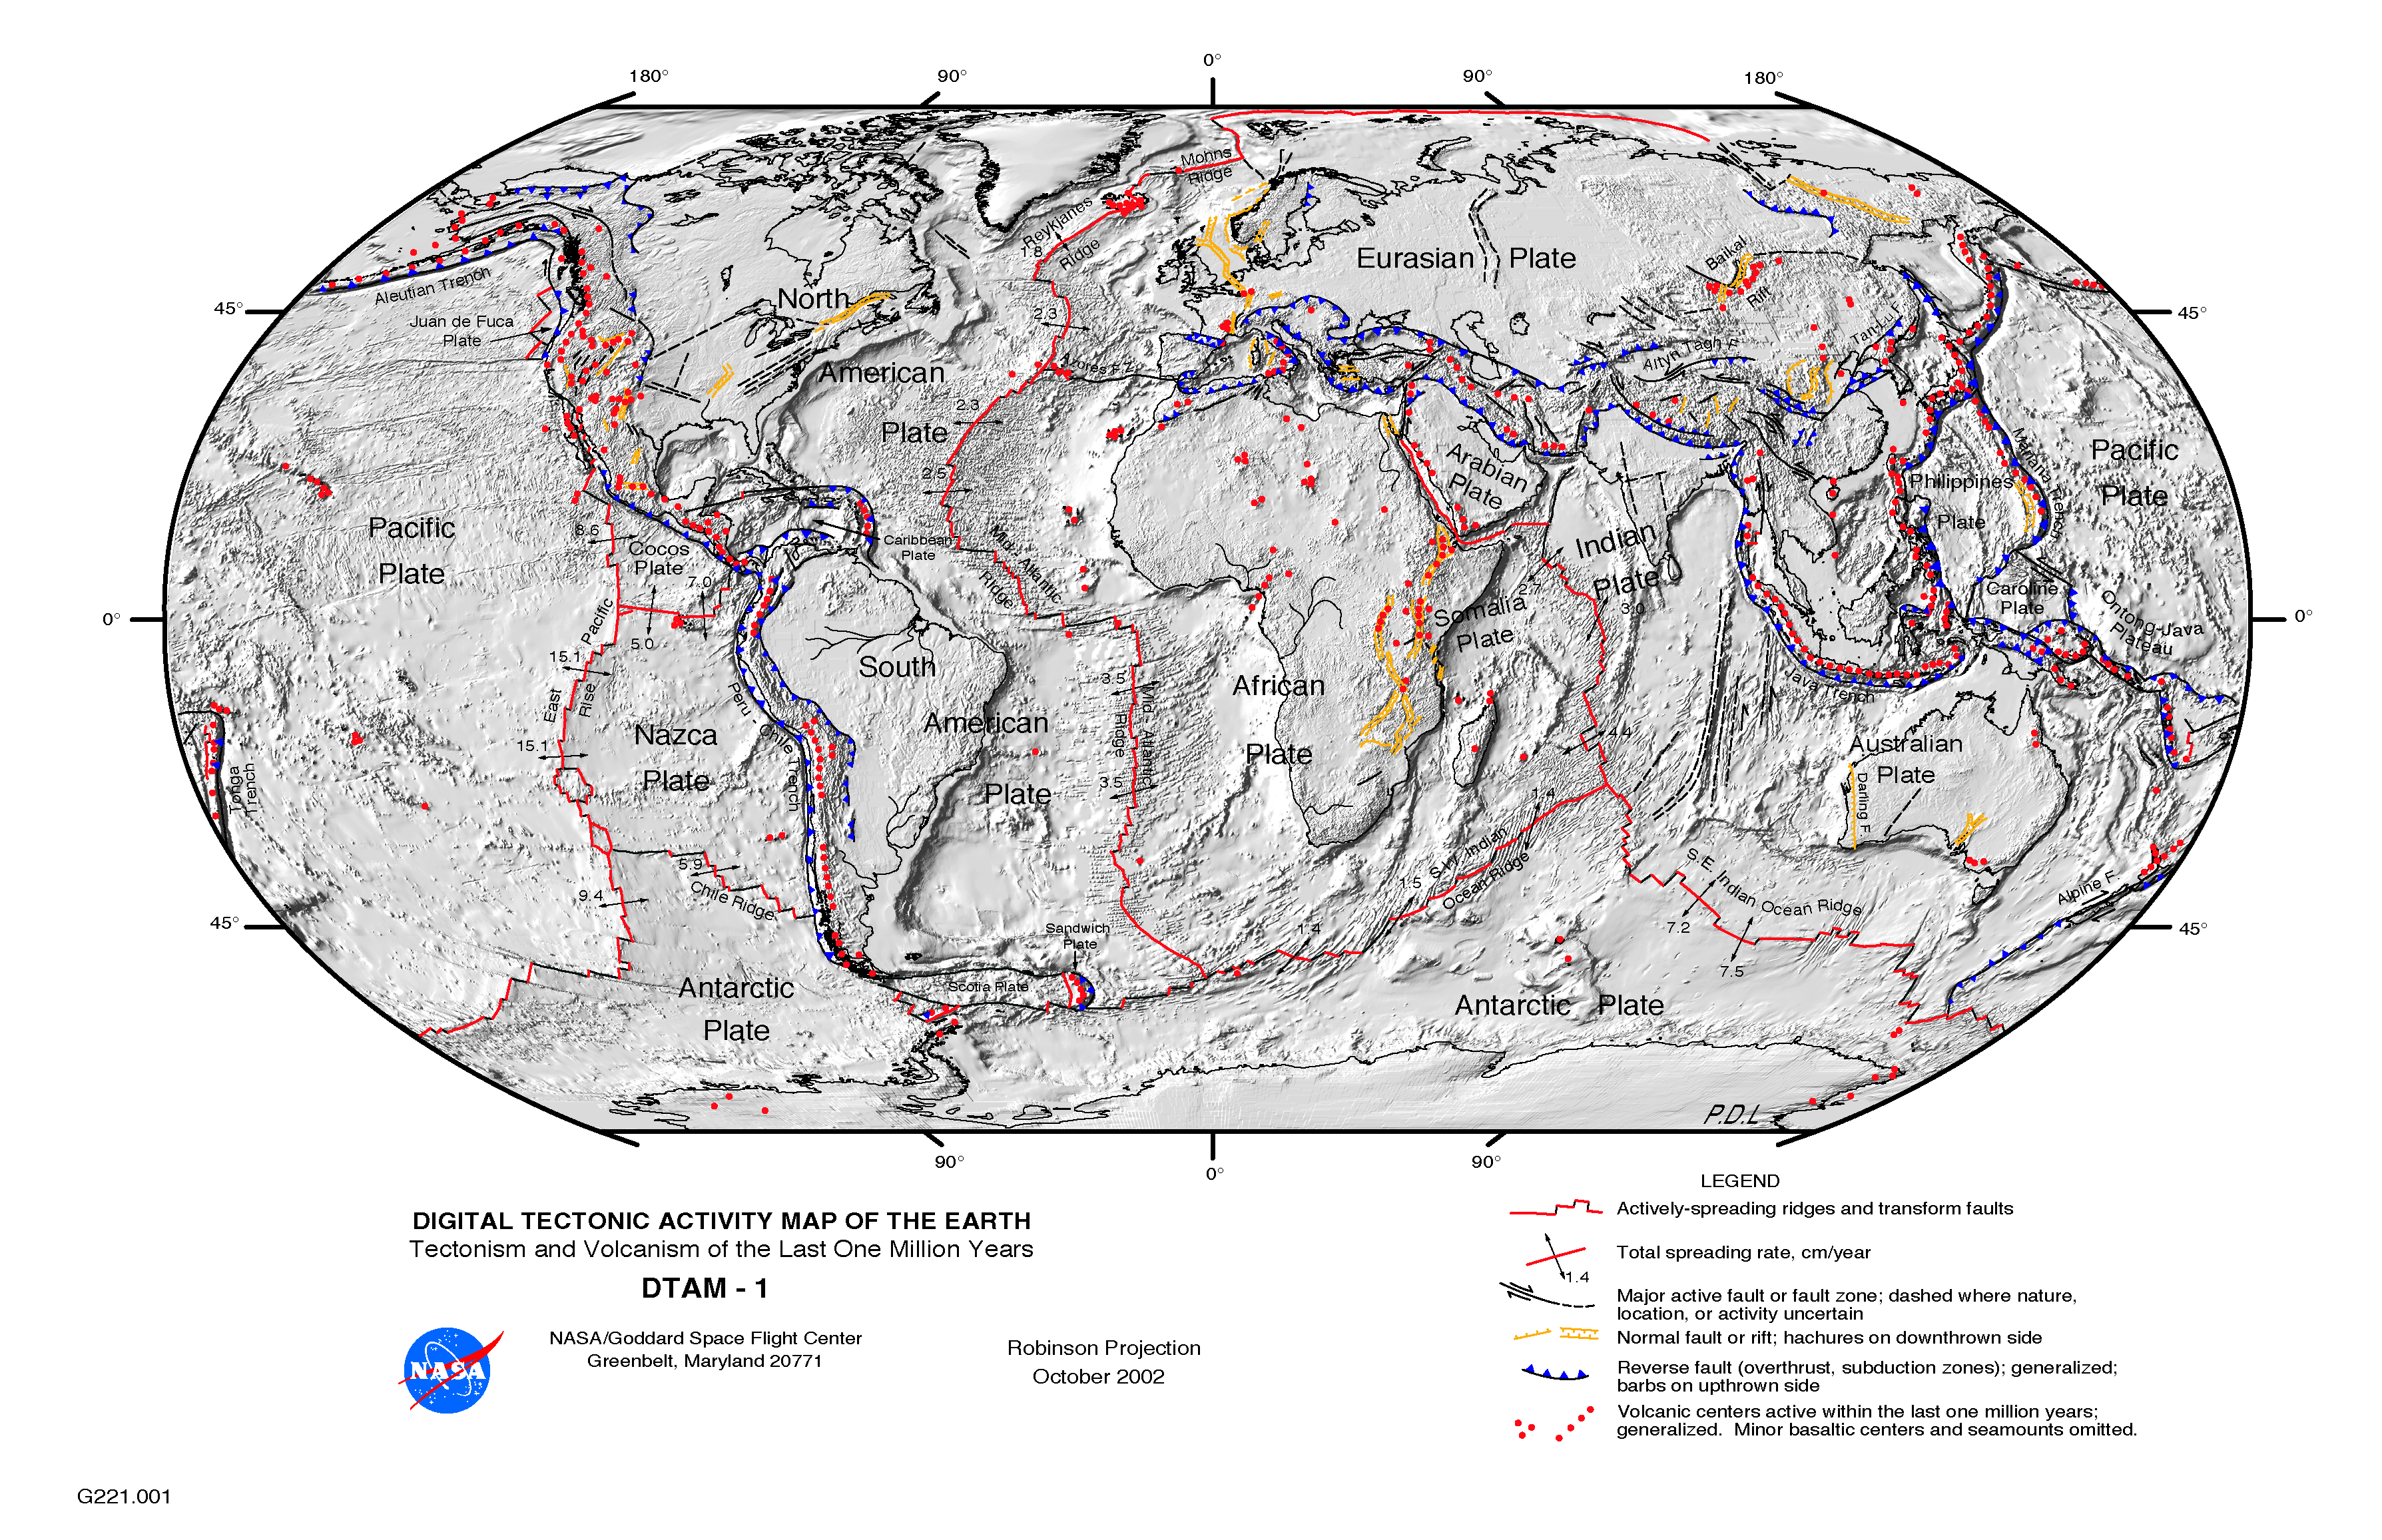 A detailed map of Earth's tectonic plates. Click on the map to enlarge._ Source: Paul Lowman and Jacob Yates, NASA Goddard Space Flight Center (2002) Public Domain [view source](https://visibleearth.nasa.gov/view.php?id=88415)_